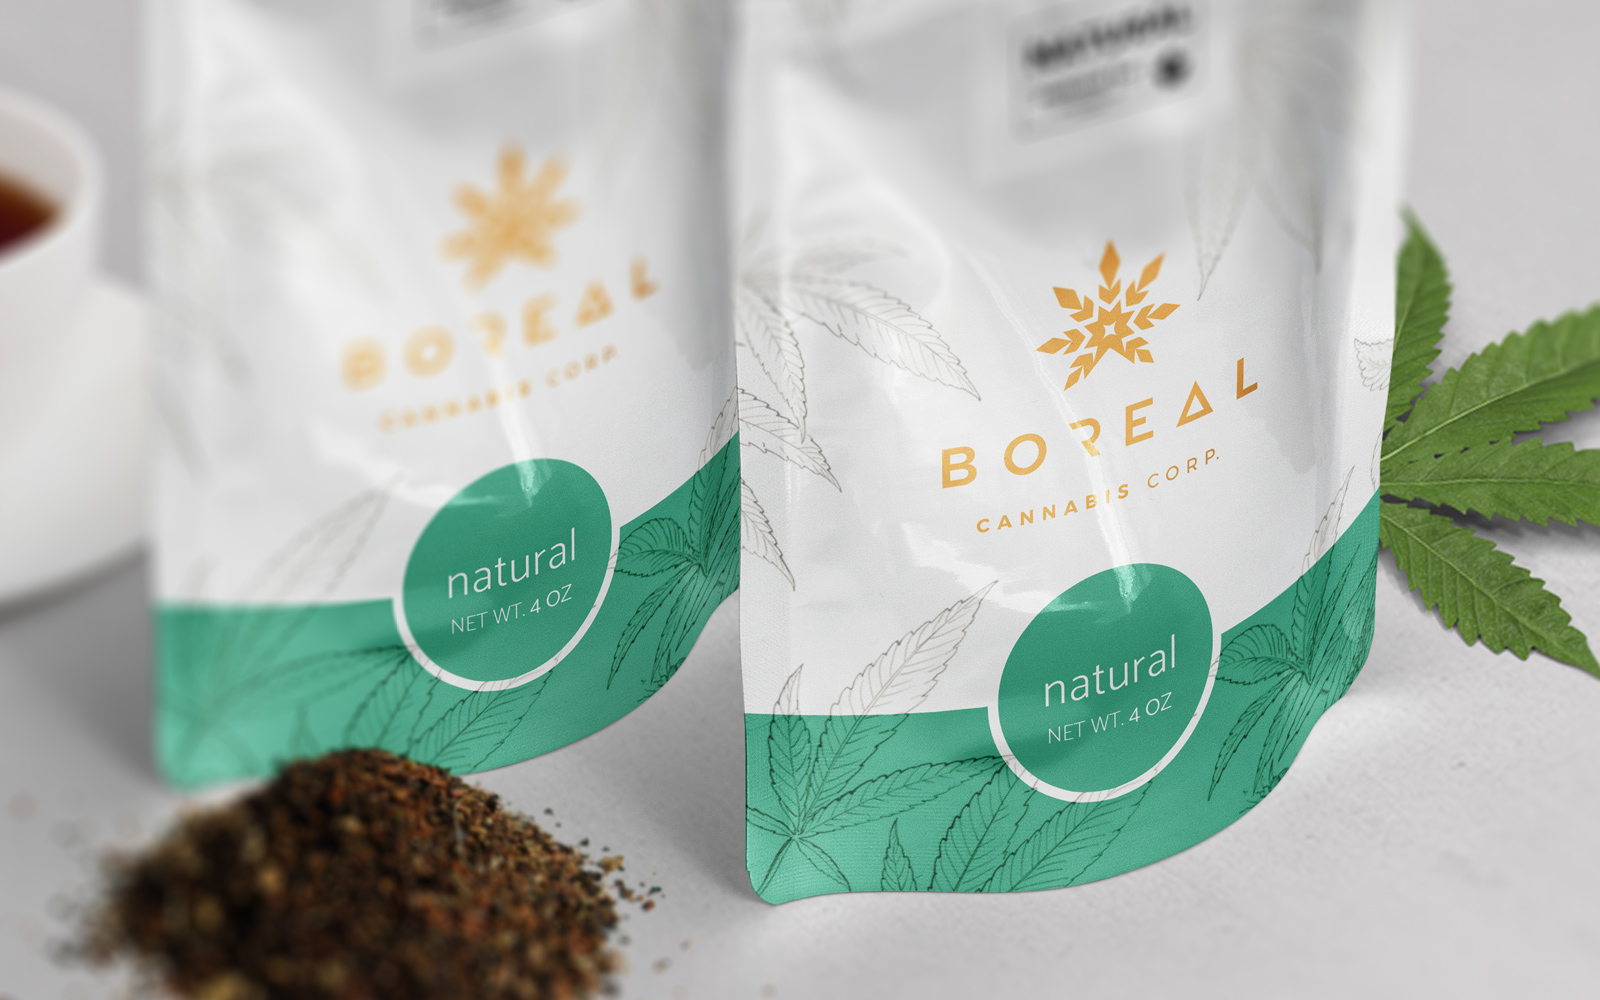 Identity and Packaging Design Concepts for Boreal Cannabis Natural Tea